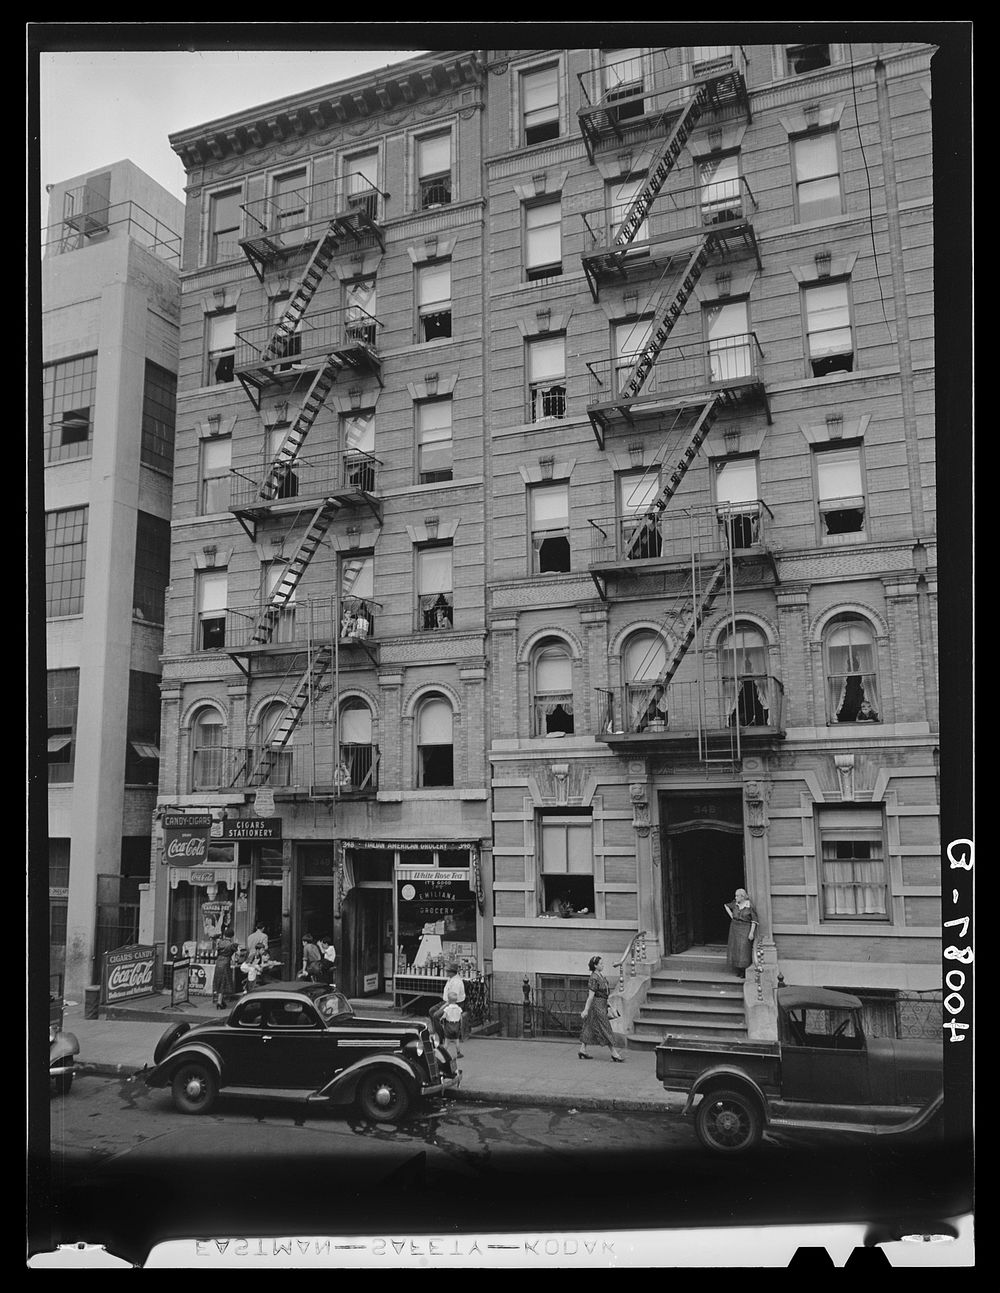 New York, New York. East 63rd Street. Sourced from the Library of Congress.